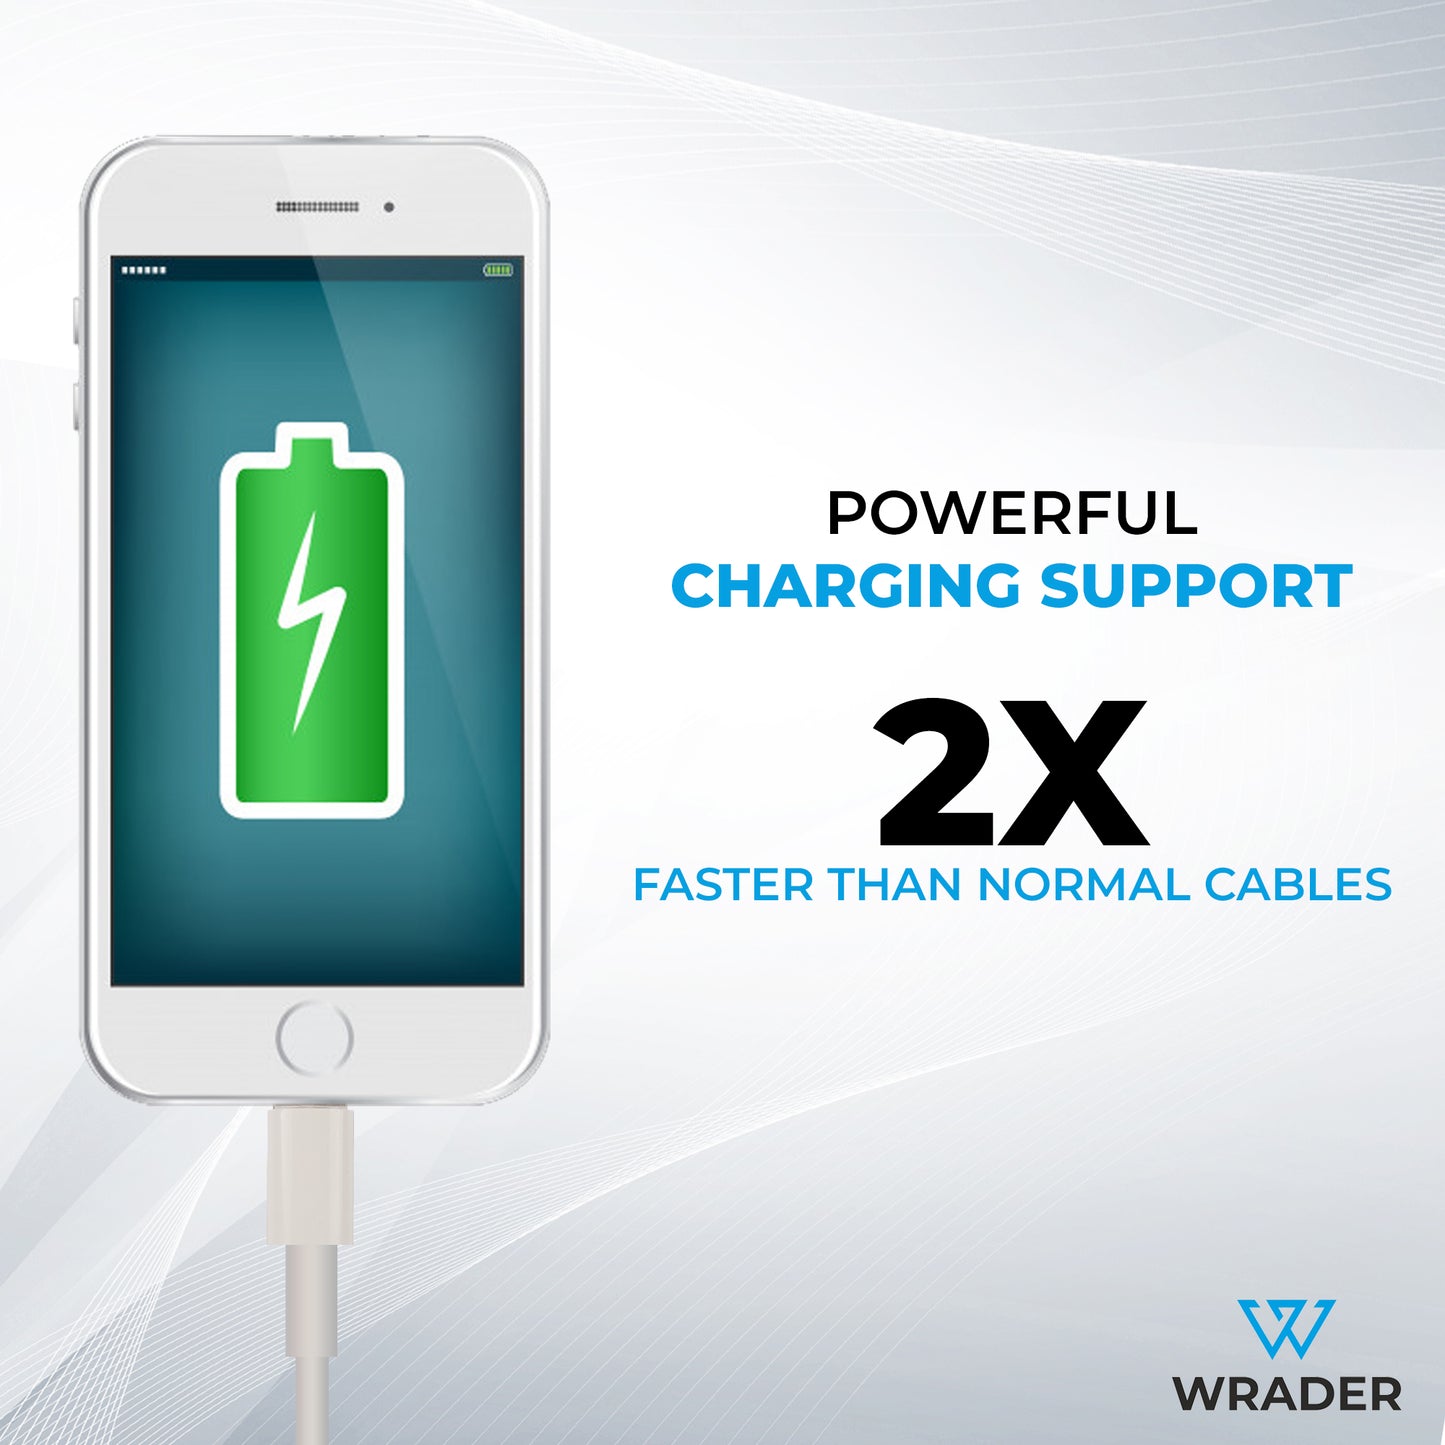 WRADER Lightning Cable 1 m iphone Fast Charging Lightning Port Cable for IPads, IPod, IPhone 10 / XR/Xs/Xs Max/X / 8/8 Plus / 7/7 Plus / 8/8 Plus / 7/7 Plus and All Other Models  (Compatible with Iphone, Ipad, Ipod, iOS, White, One Cable)